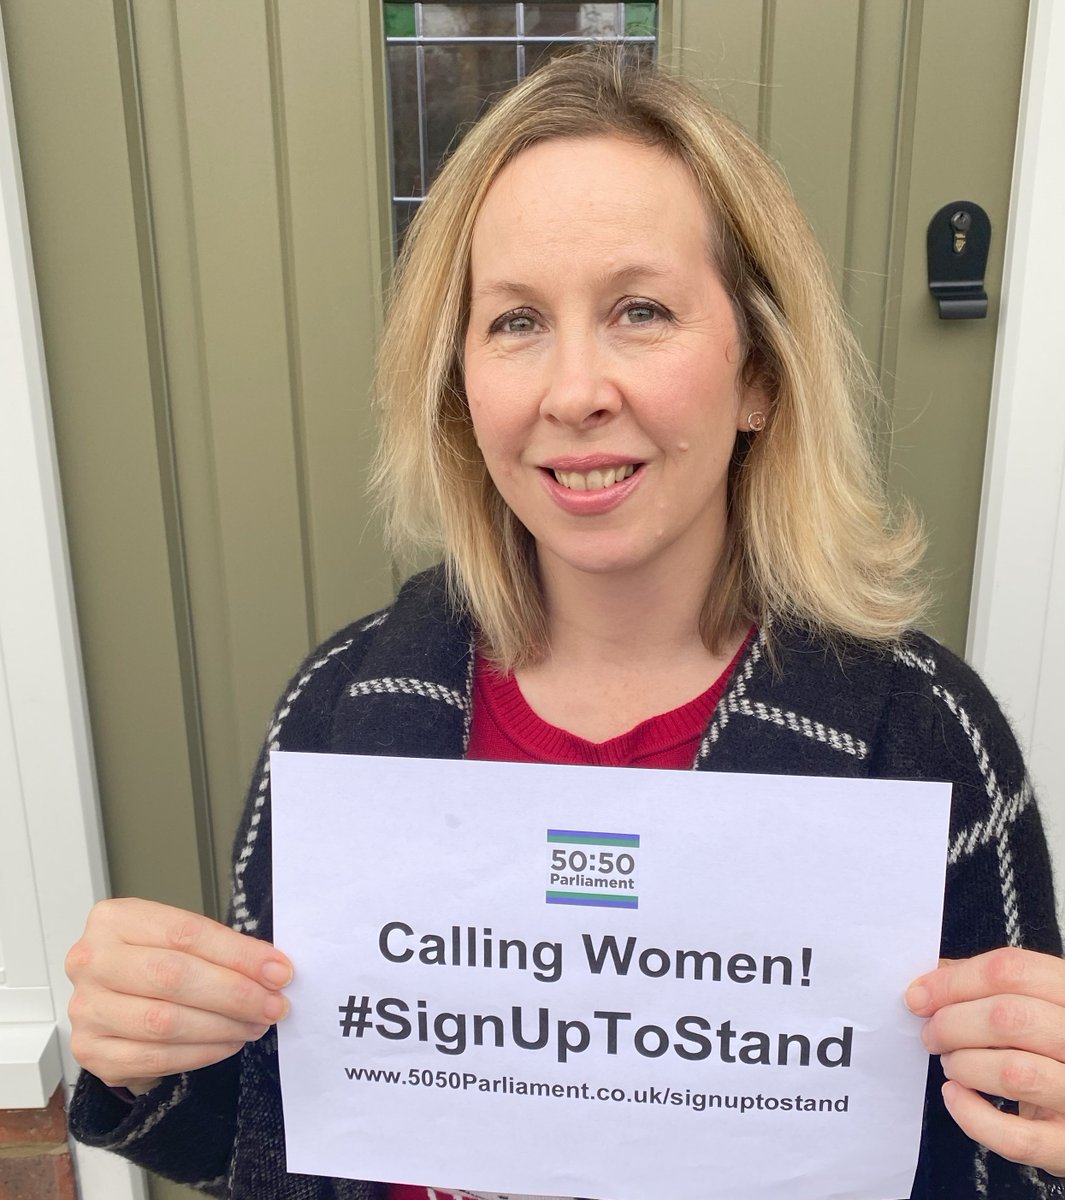 3 years on and I'm still standing! 
Today is @5050Parliament #AskHerToStand day. 
We need more women's voices to be heard. #SignUpToStand on #5050Parliament website. 5050Parliament.co.uk/signuptostand
#FionaCollins4Aldershot